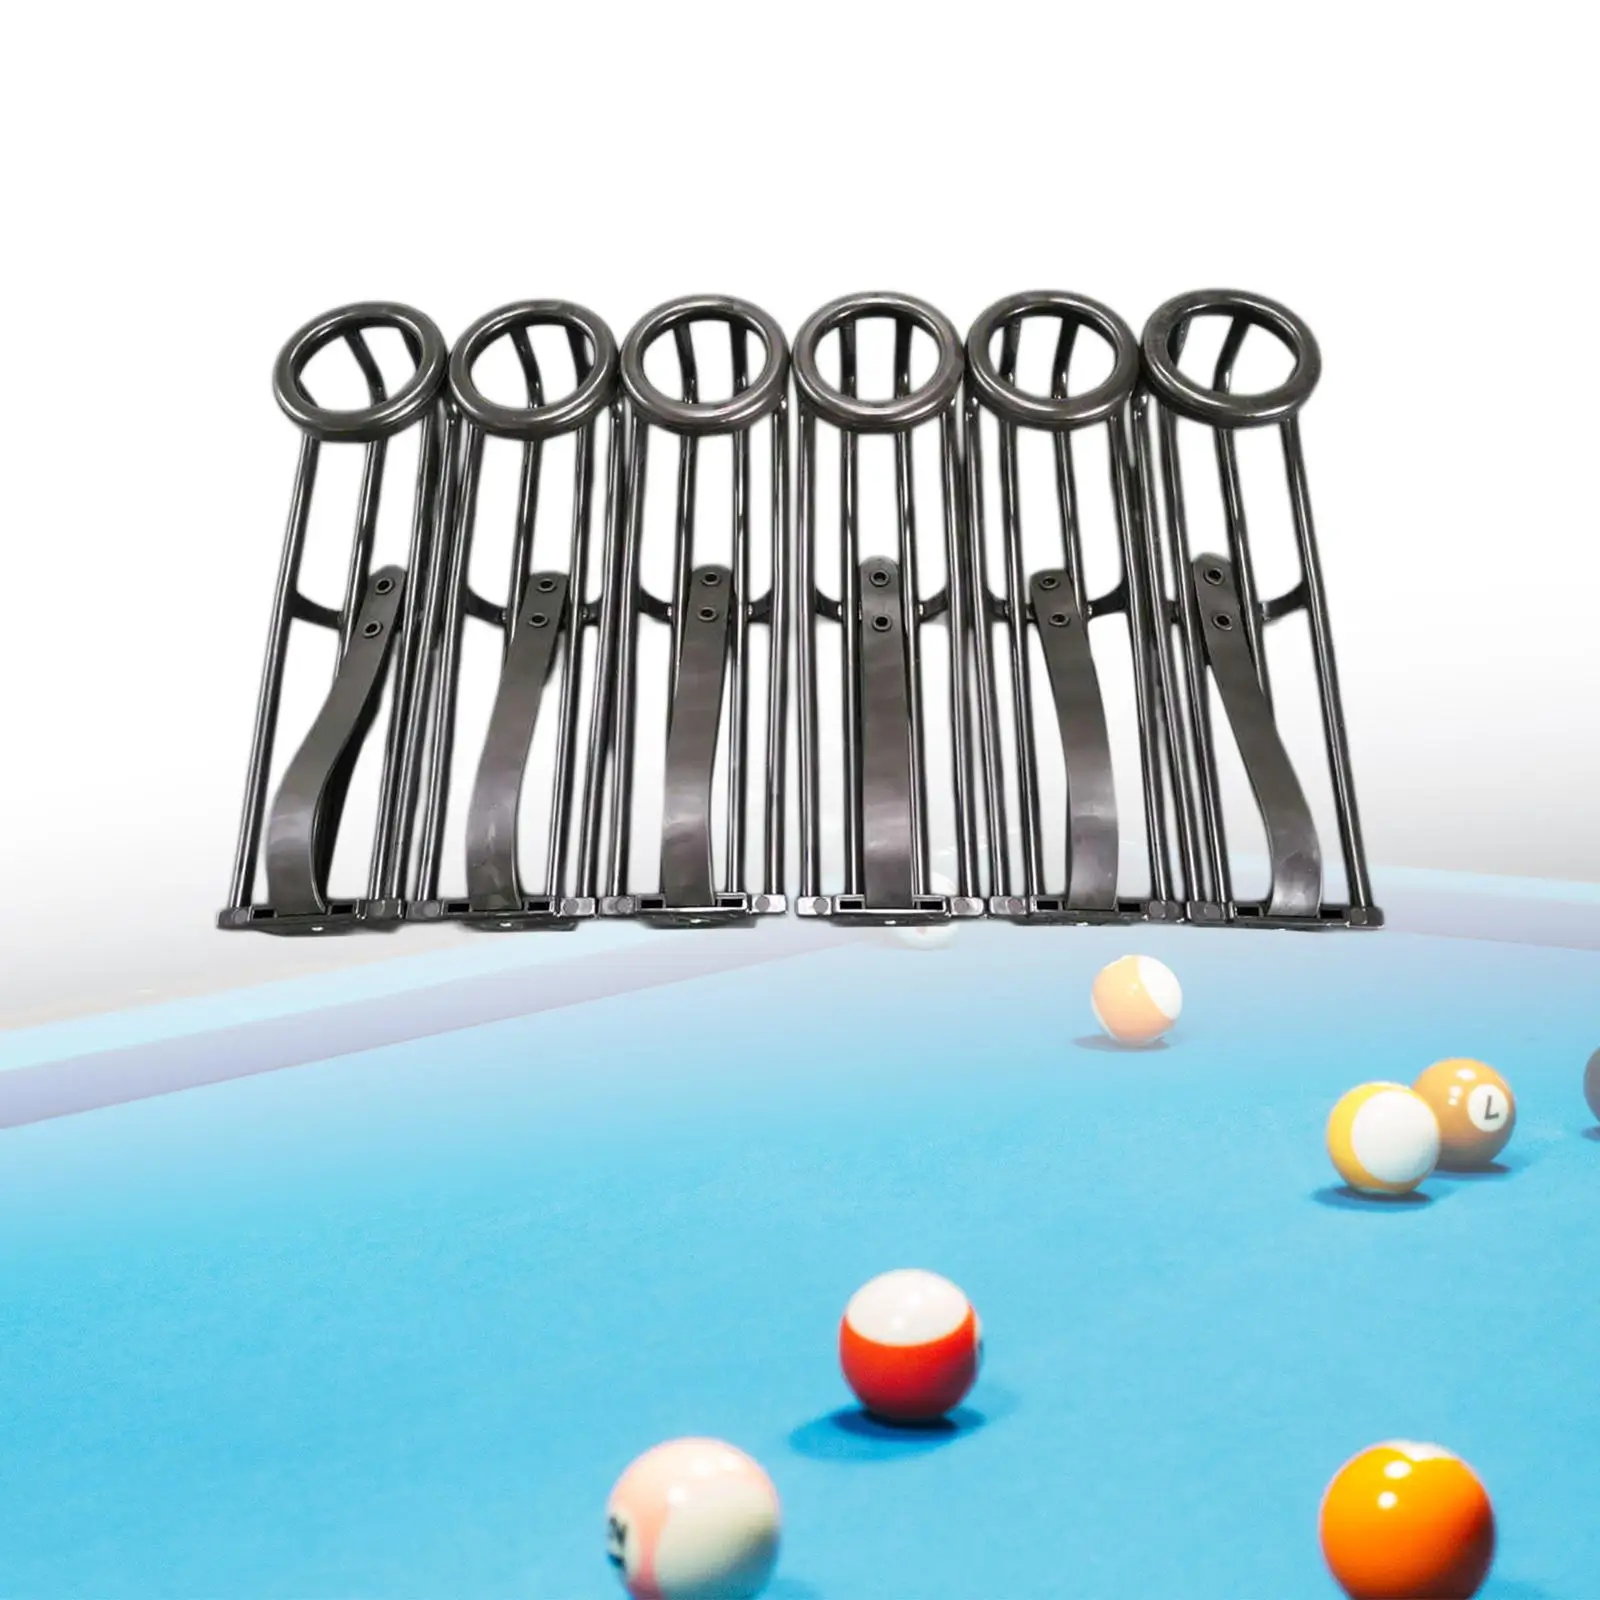 6x Billiards Table Slide Track Tool Easy to Install Parts Accessories Entertainment Pool Snooker Billiards Table Pocket Rail